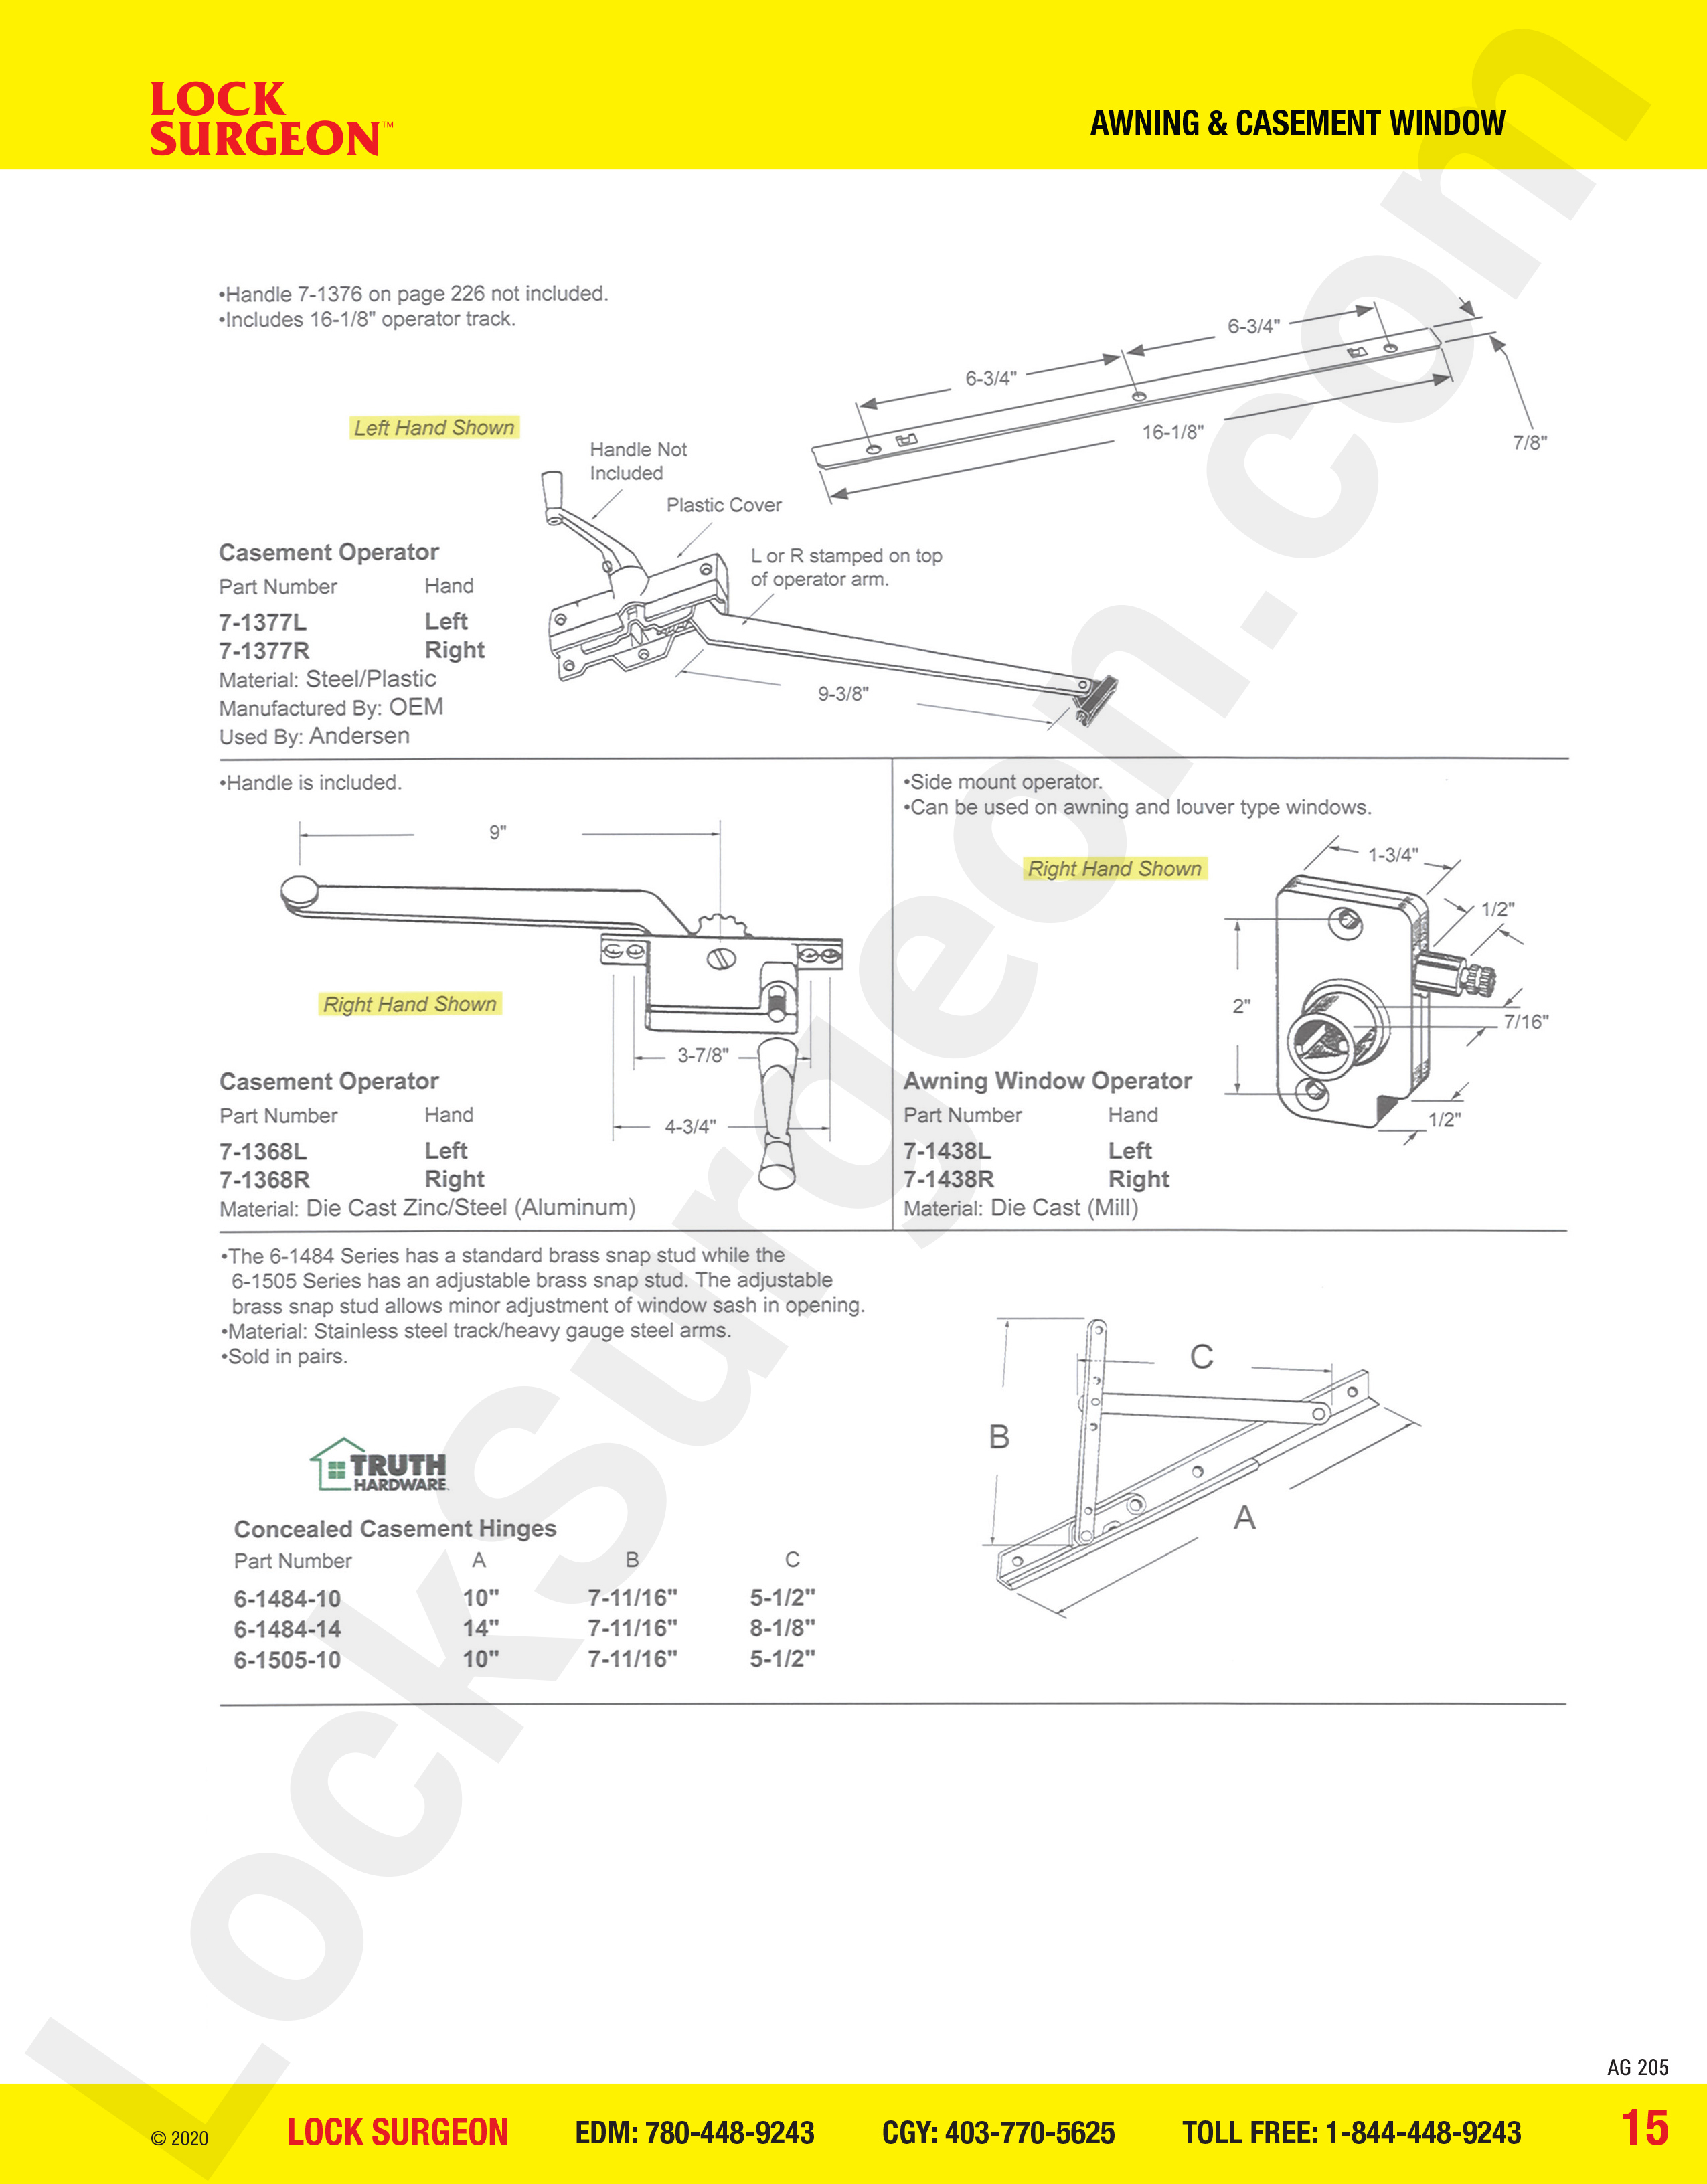 awning and casement window parts for operators.